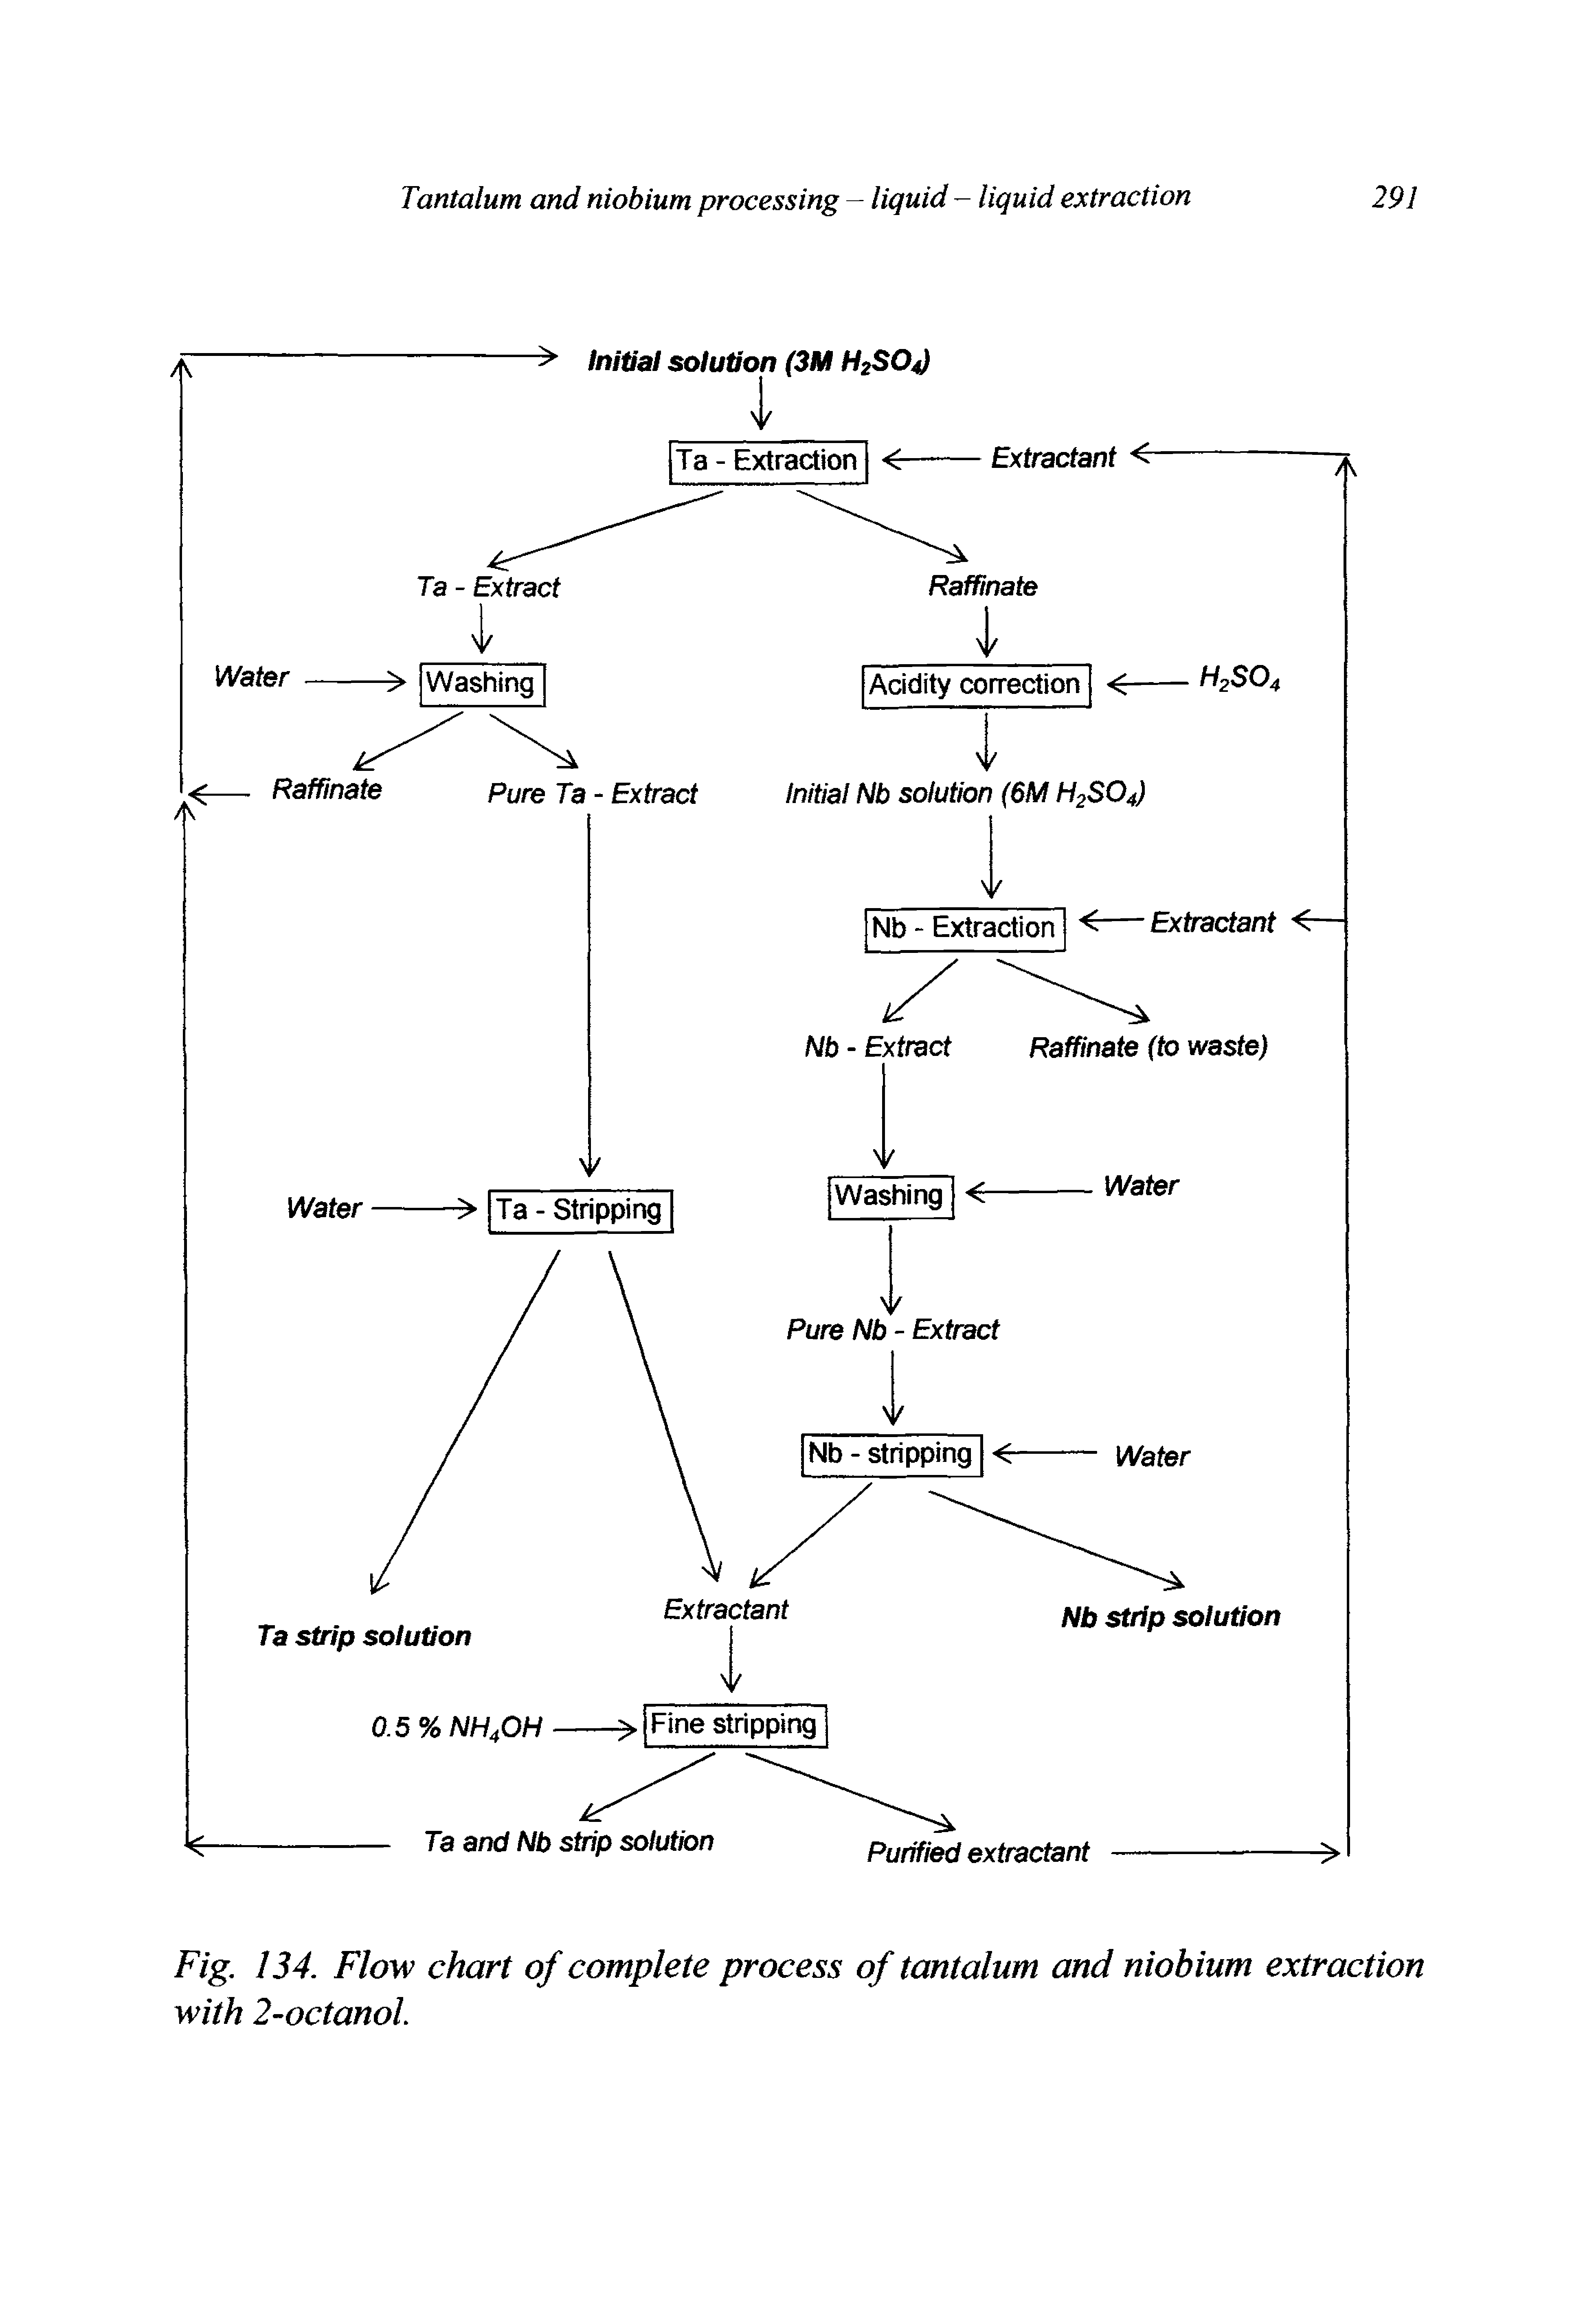 Fig. 134. Flow chart of complete process of tantalum and niobium extraction with 2-octanol.